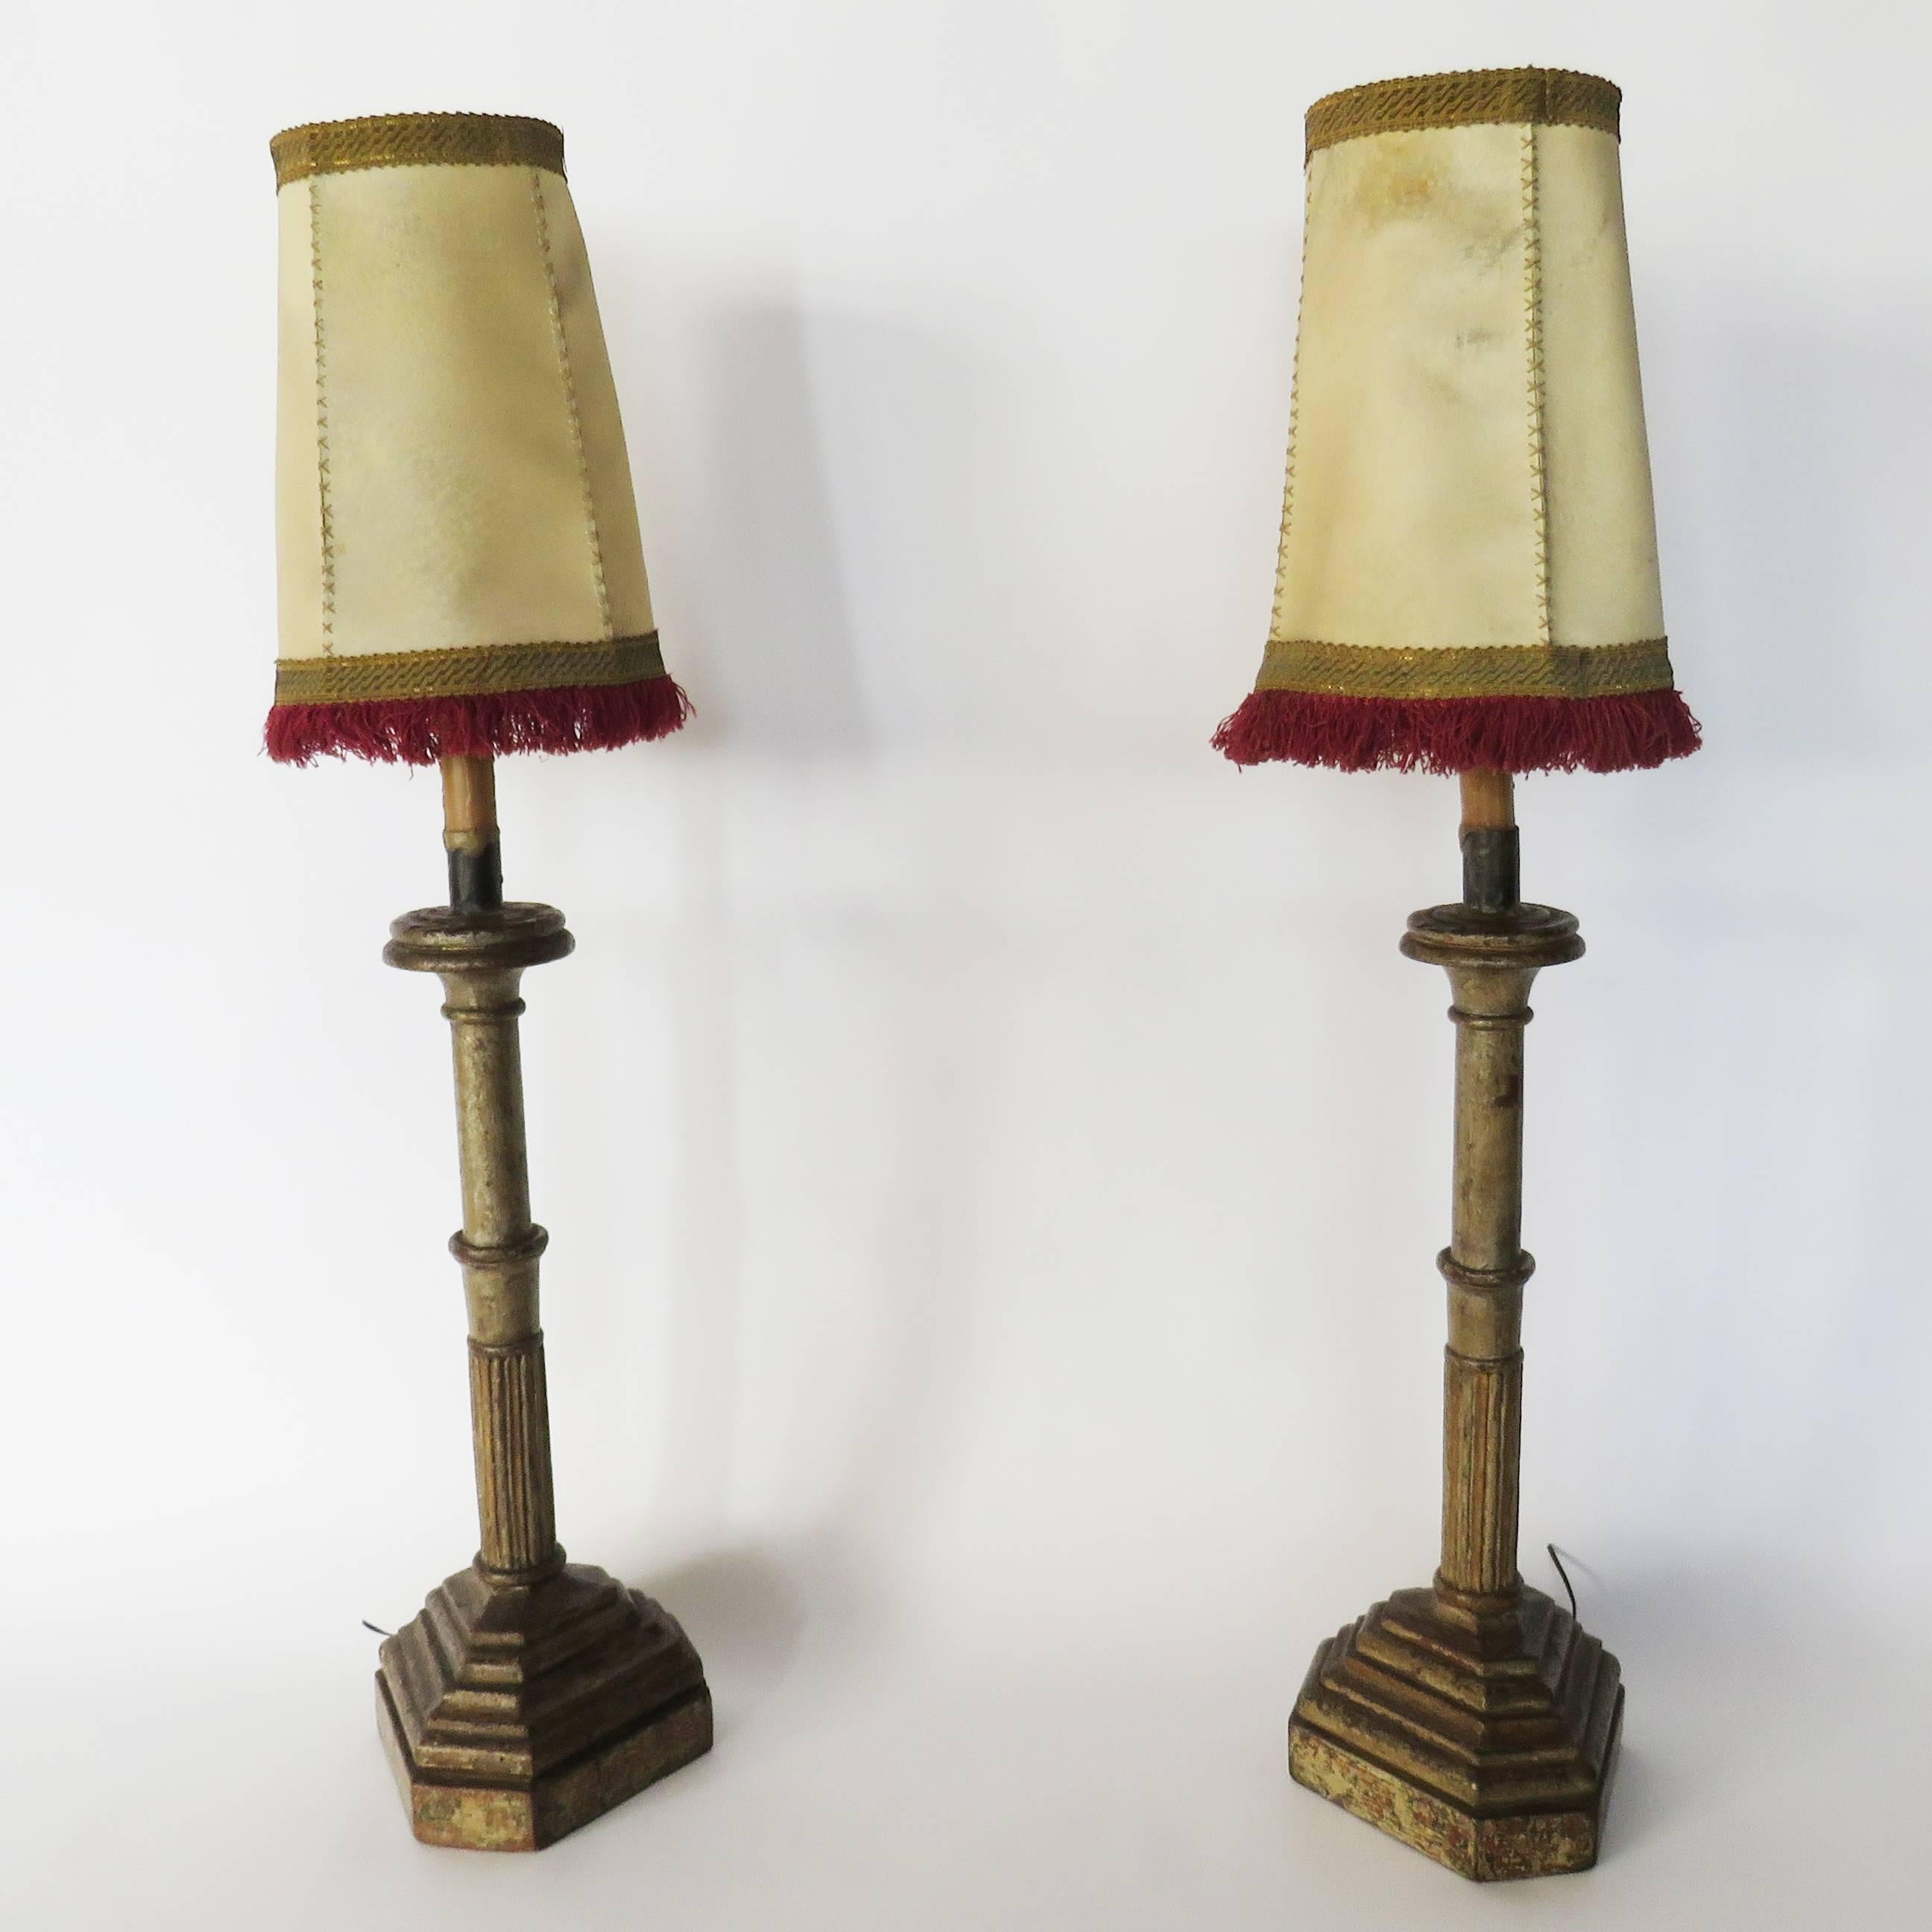 Ringed and fluted wooden standard over a molded tri-form plinth, genuine pigskin shades with cross stitching and ruby fringing. Now drilled and mounted as lamps.

Candlestick size: Height 30 inches to the socket x diameter 8 inches
Shade size: